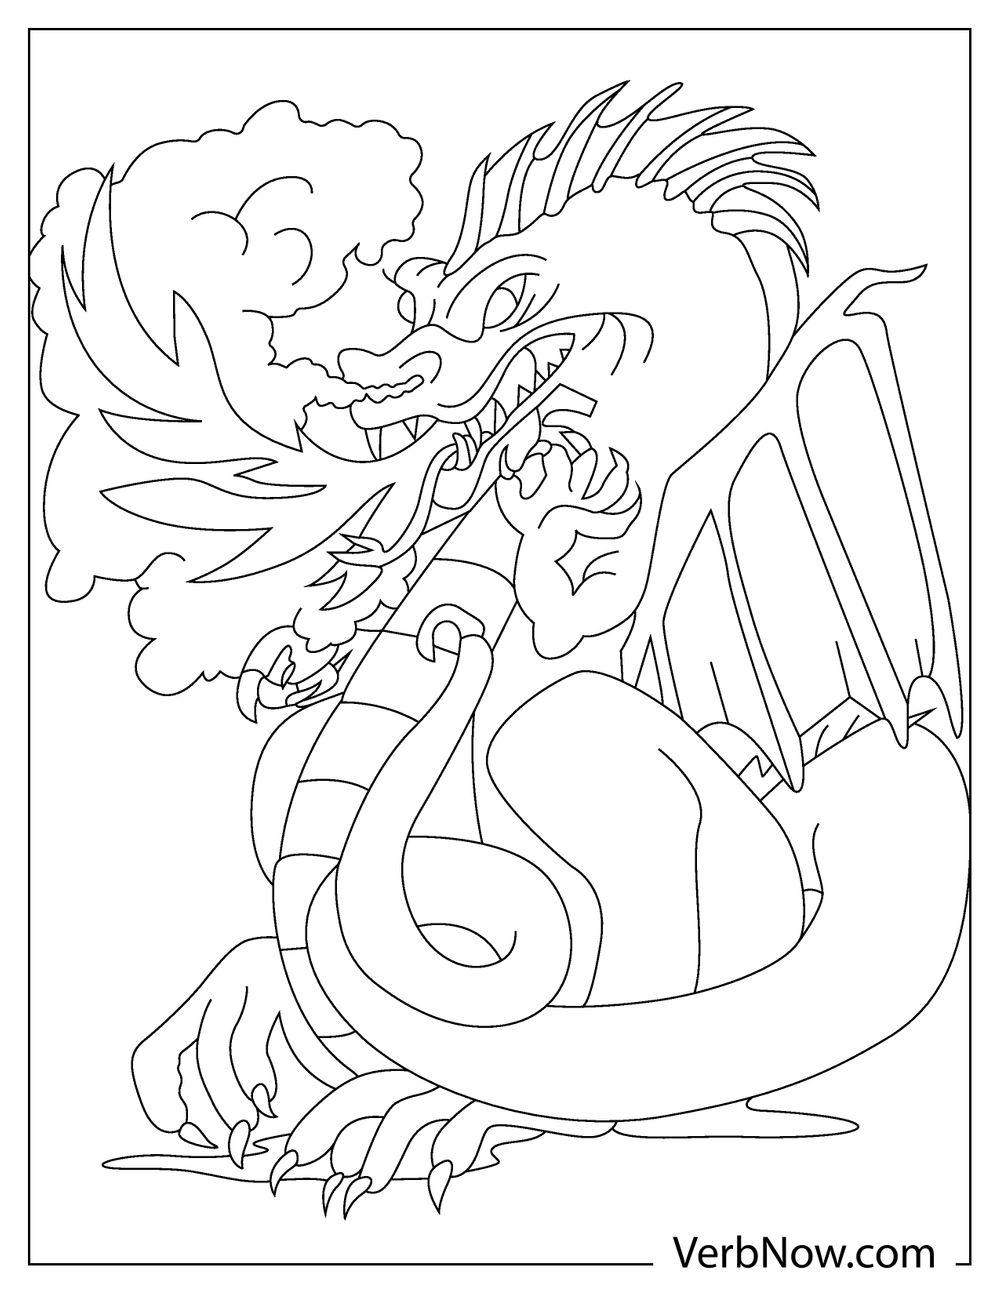 Free FIRE DRAGON Coloring Pages & Book for Download (Printable PDF) -  VerbNow